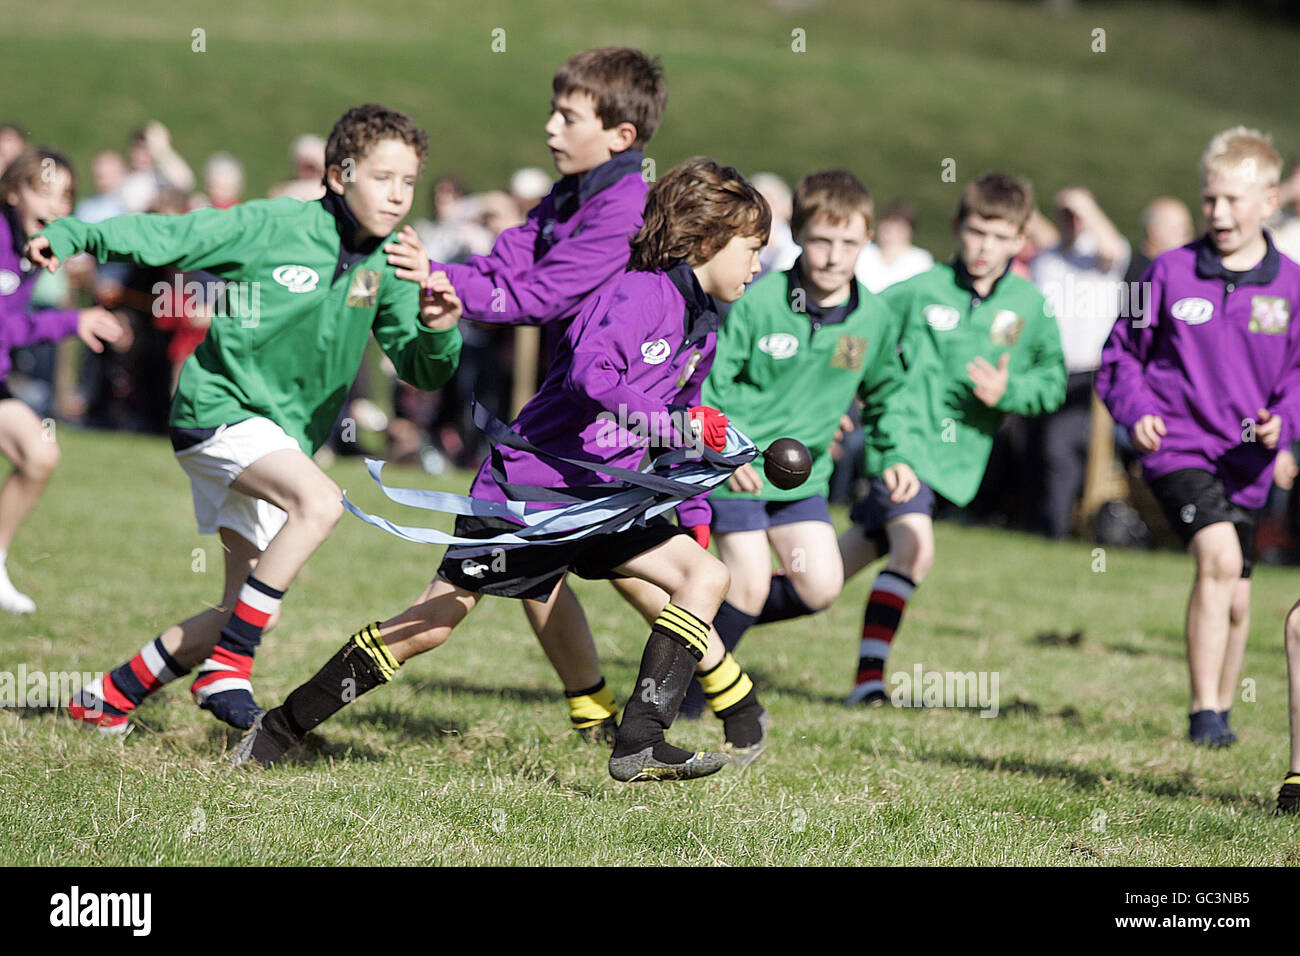 Local schoolchildren in teams of Selkirkshire (green) and Roxburghshire (purple) take part in a re-enactment of the 1815 Carterhaugh Ba' game, that some historians believe was a forerunner to the game of rugby, at Bowhill, Selkirkshire. Stock Photo